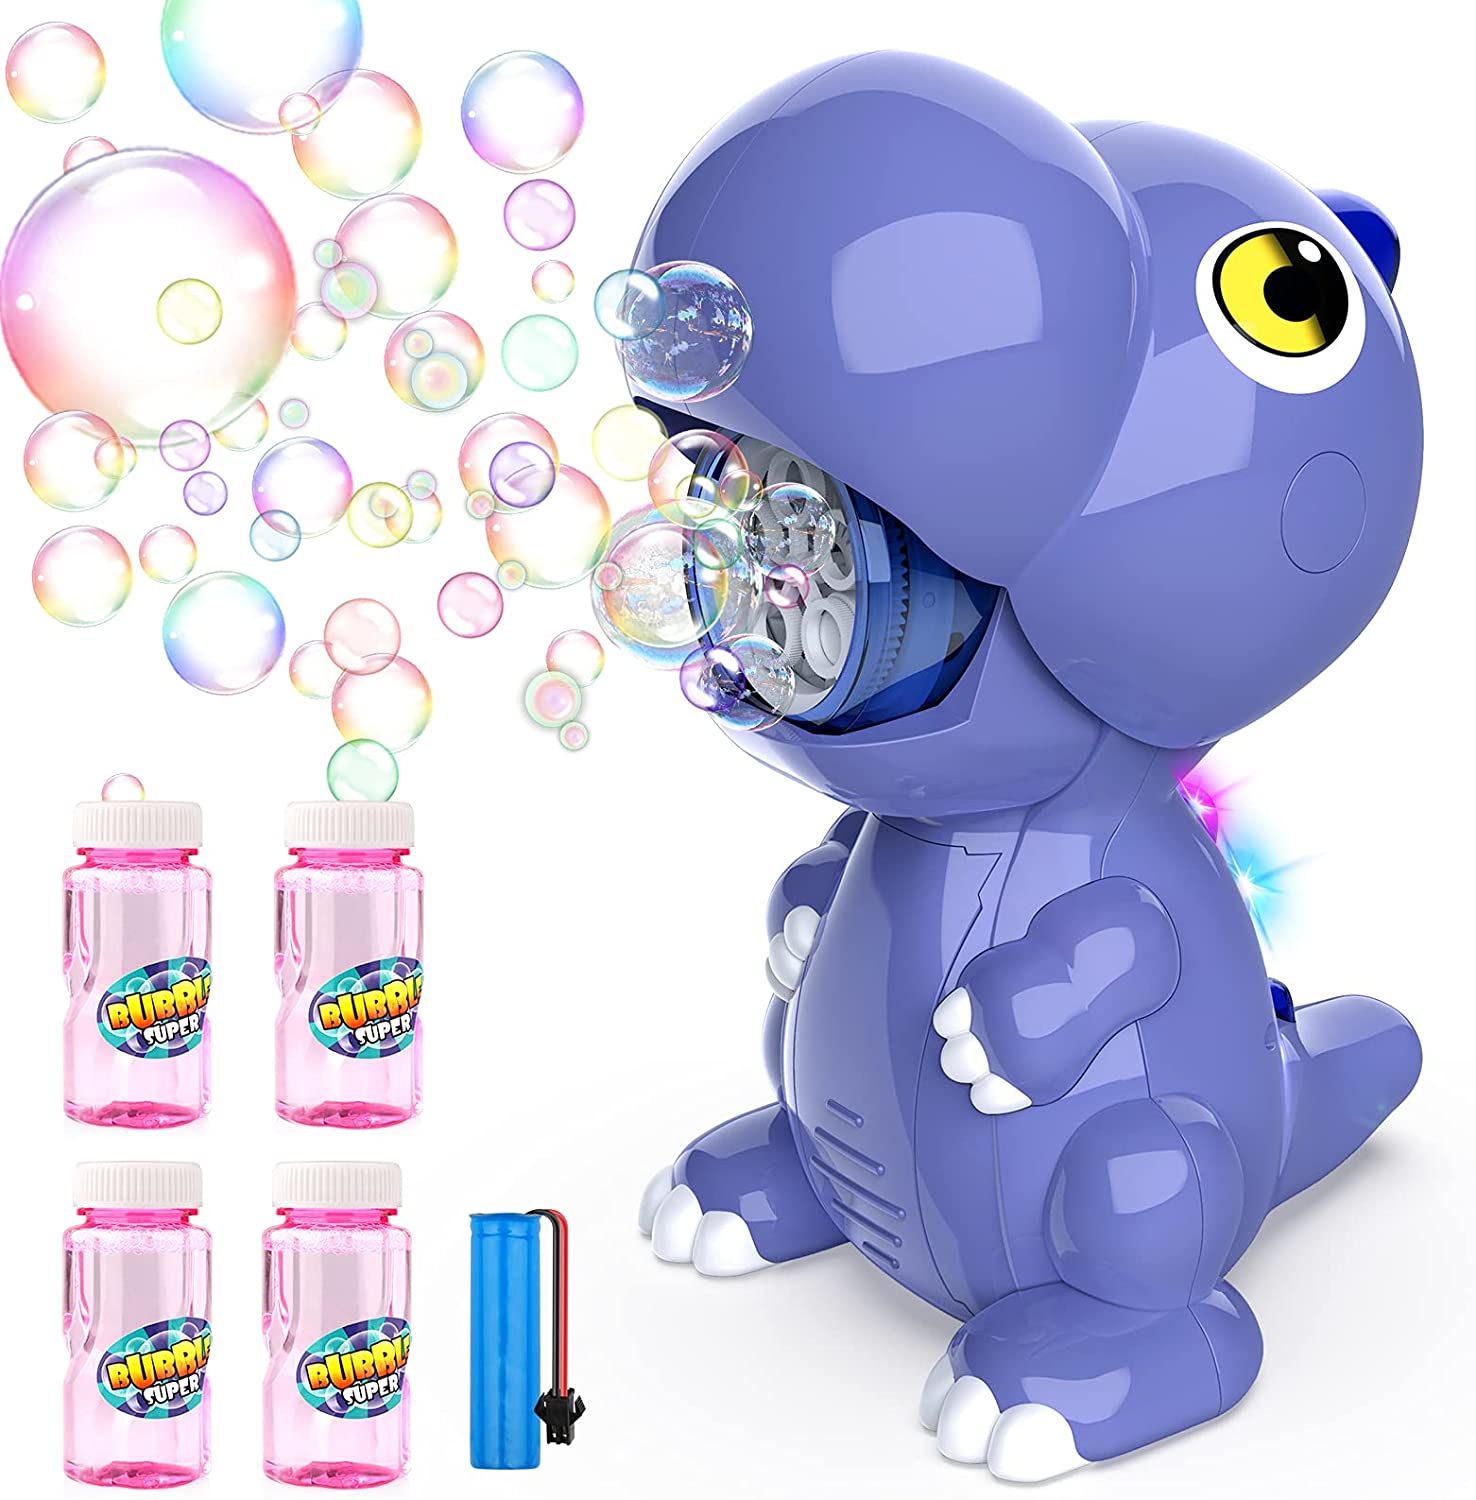 Baztoy Bubble Machine Kit Automatic Dinosaur Bubble Making Toys Kids Boys Toddler Electric Bubble Maker with 4 Bottles Bubble Solution Bubble Blower Games Gift for Party Wedding Outdoor Indoor Garden B08S3H9R7T 